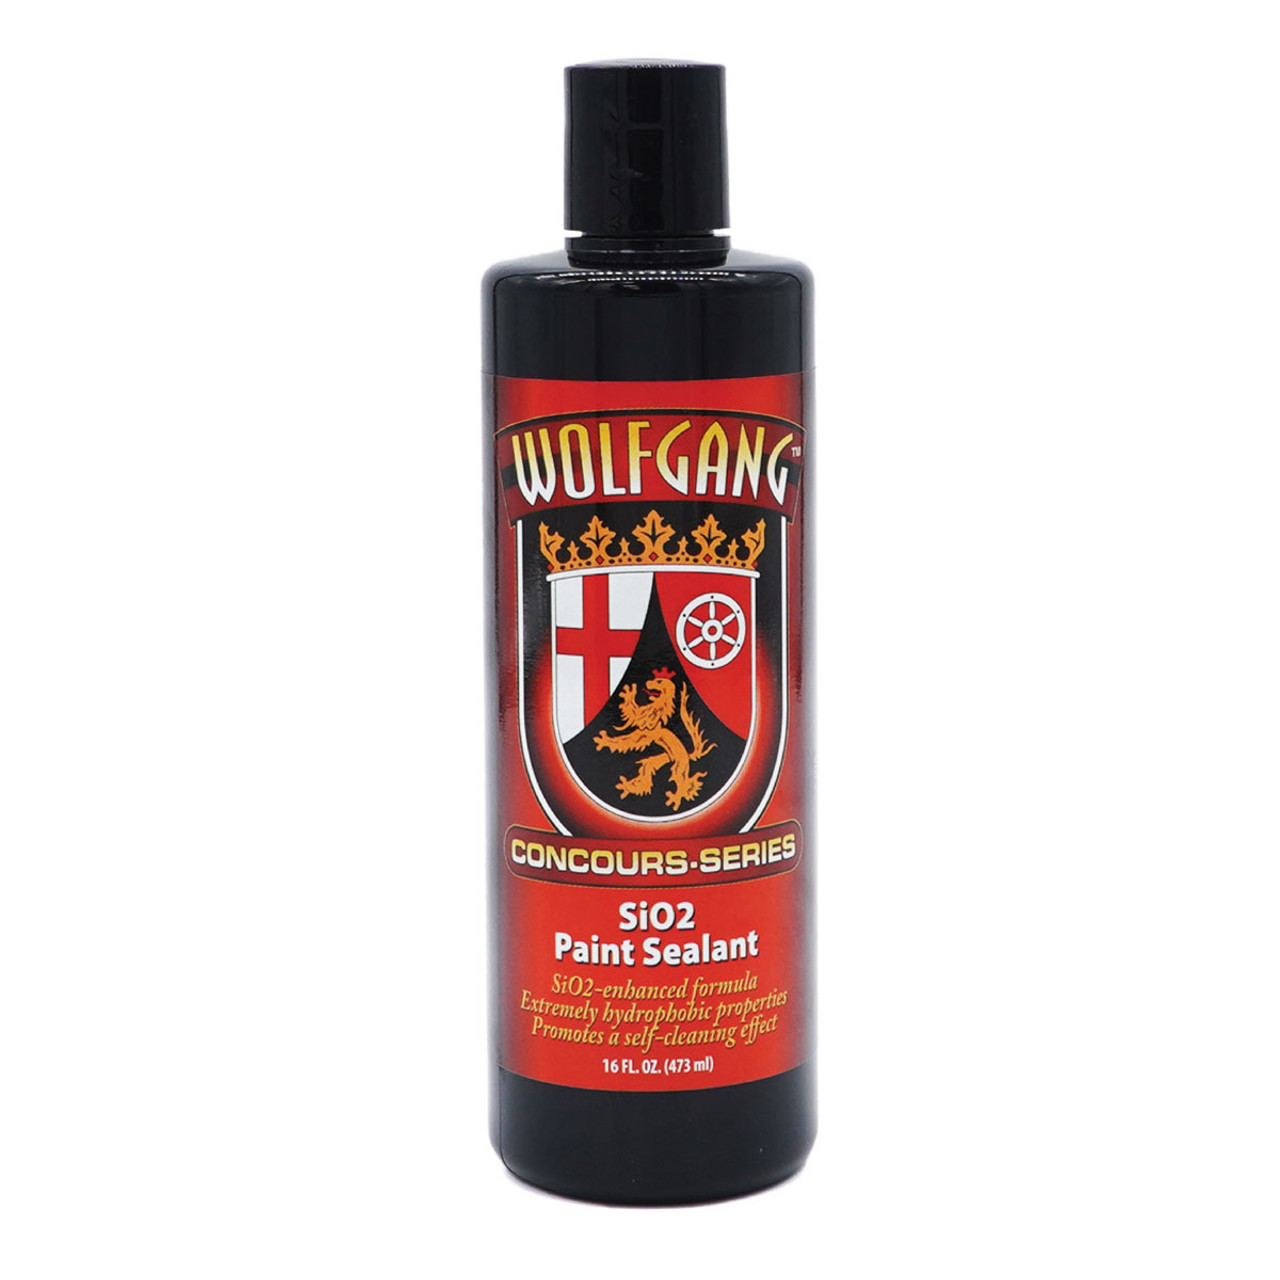 Wolfgang Concours Series SiO2 Car Paint Sealant